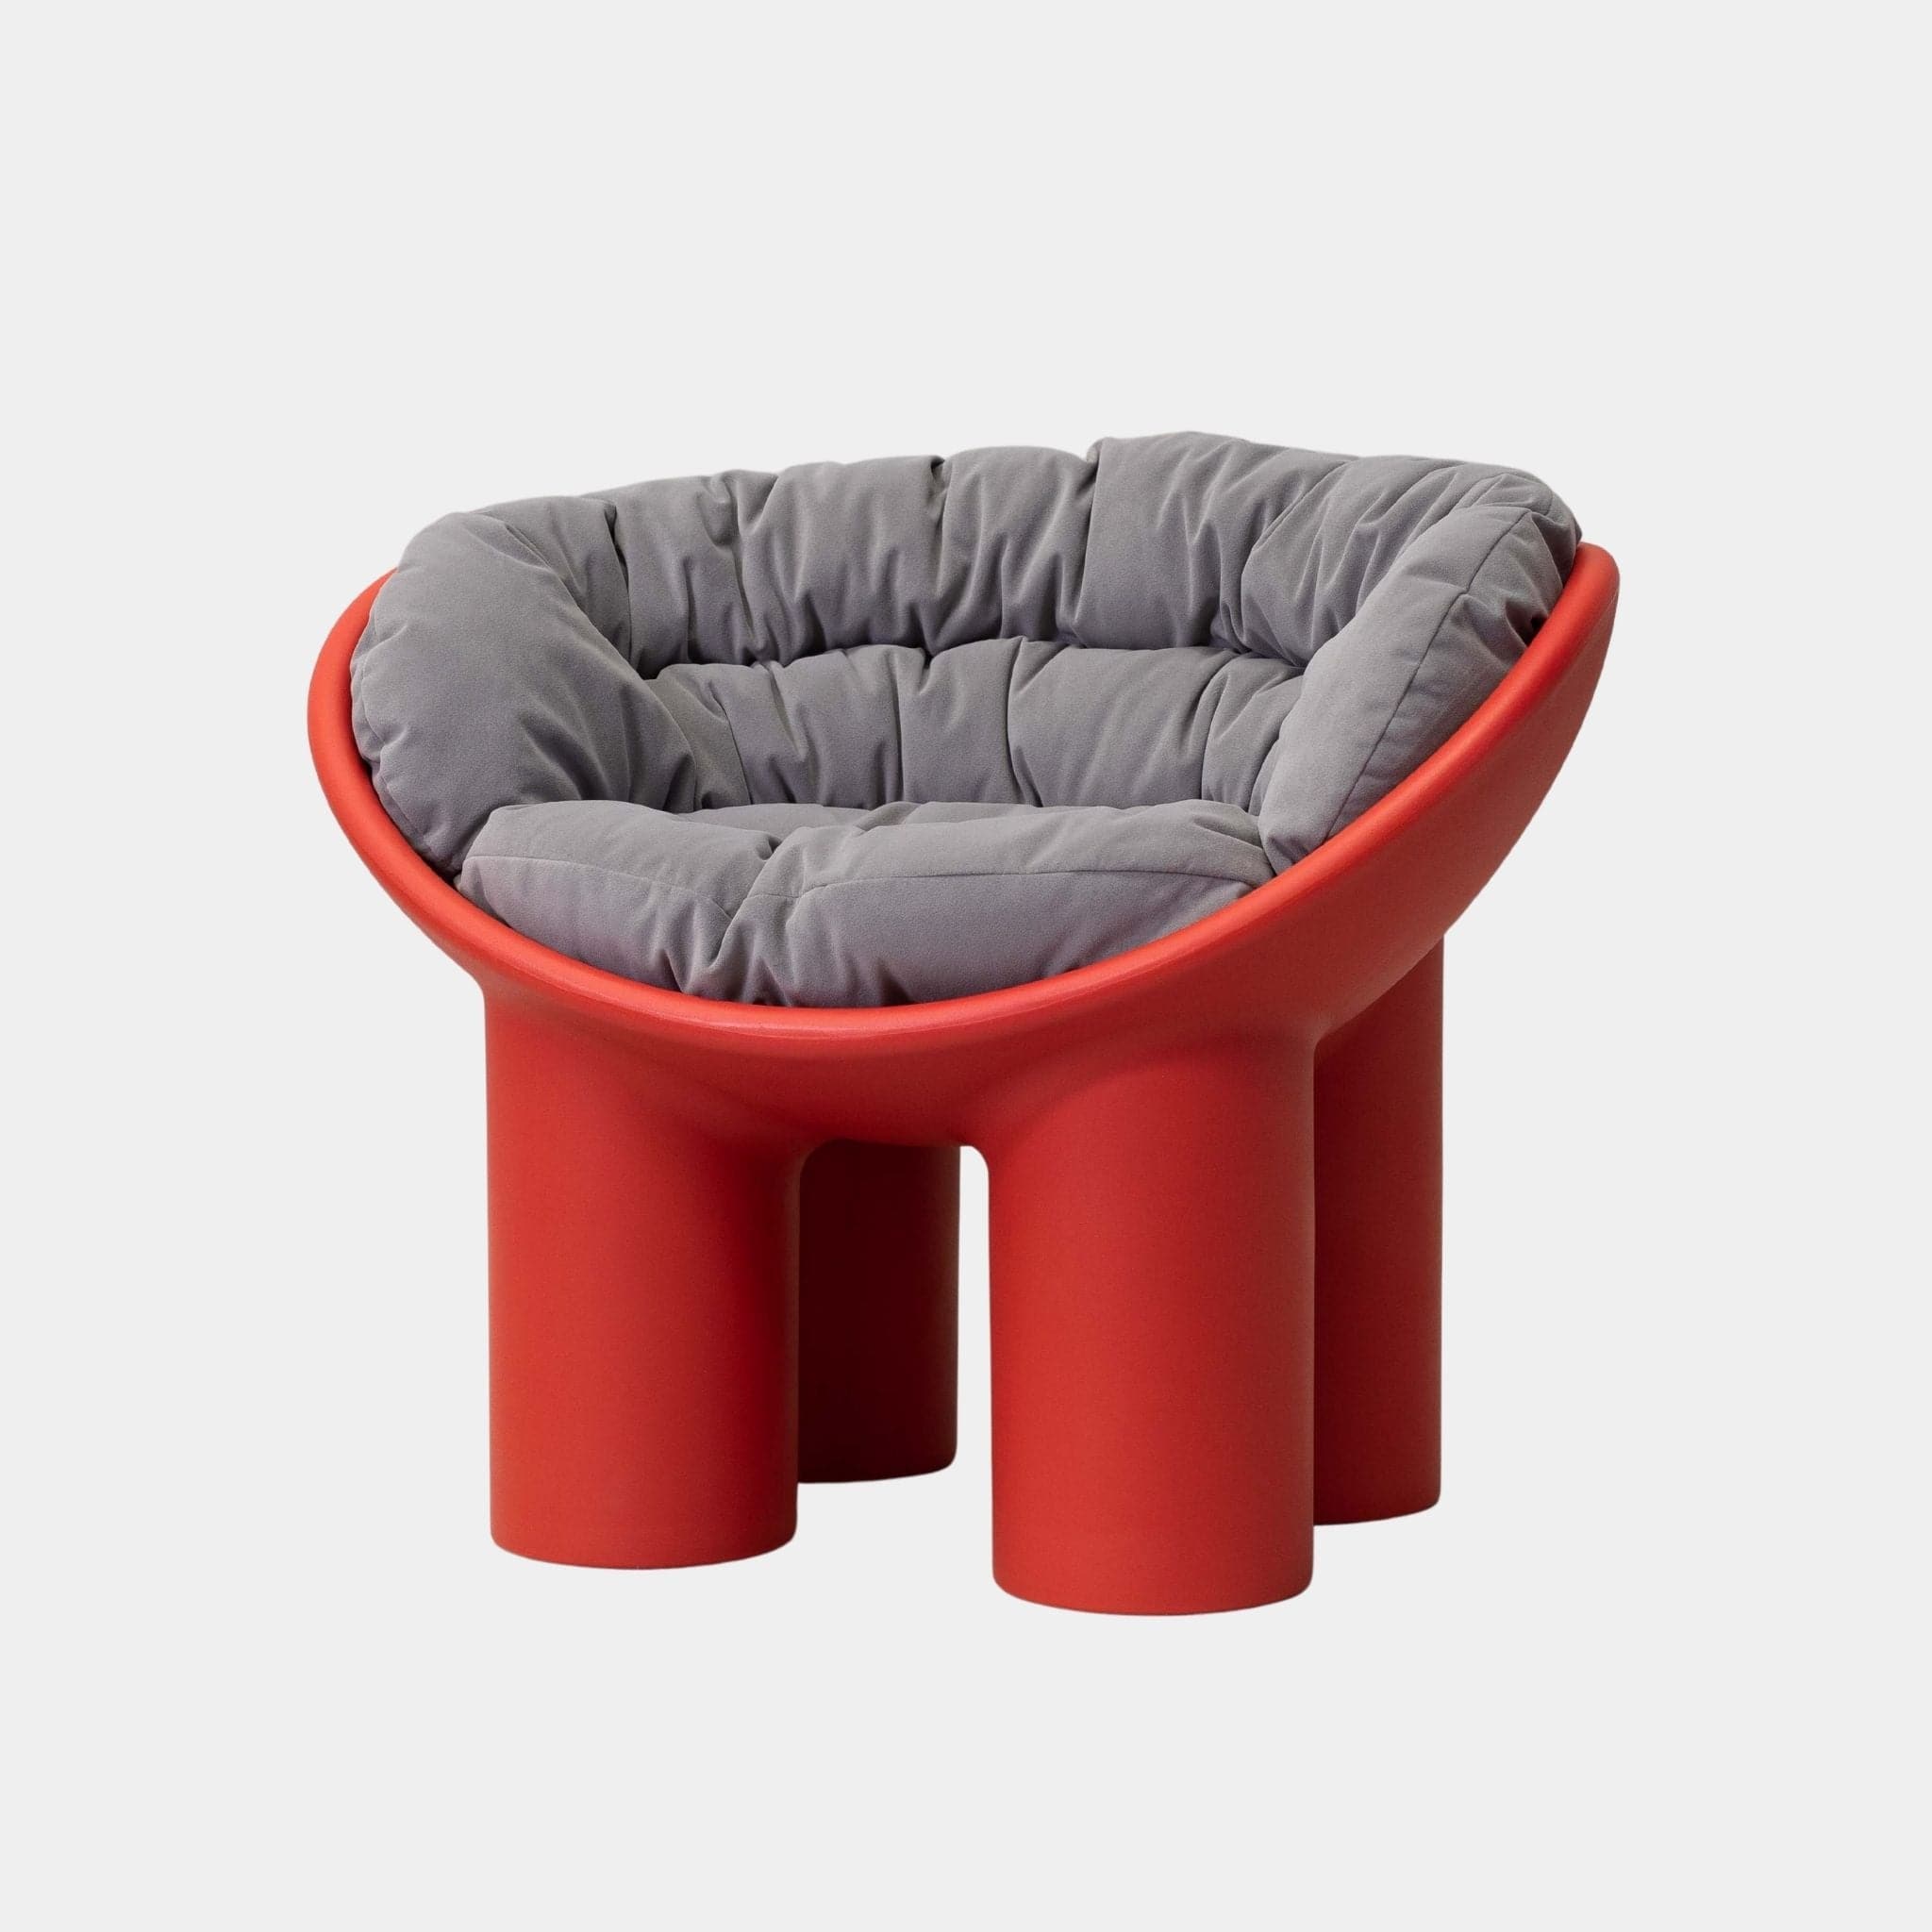 roly poly chair replica